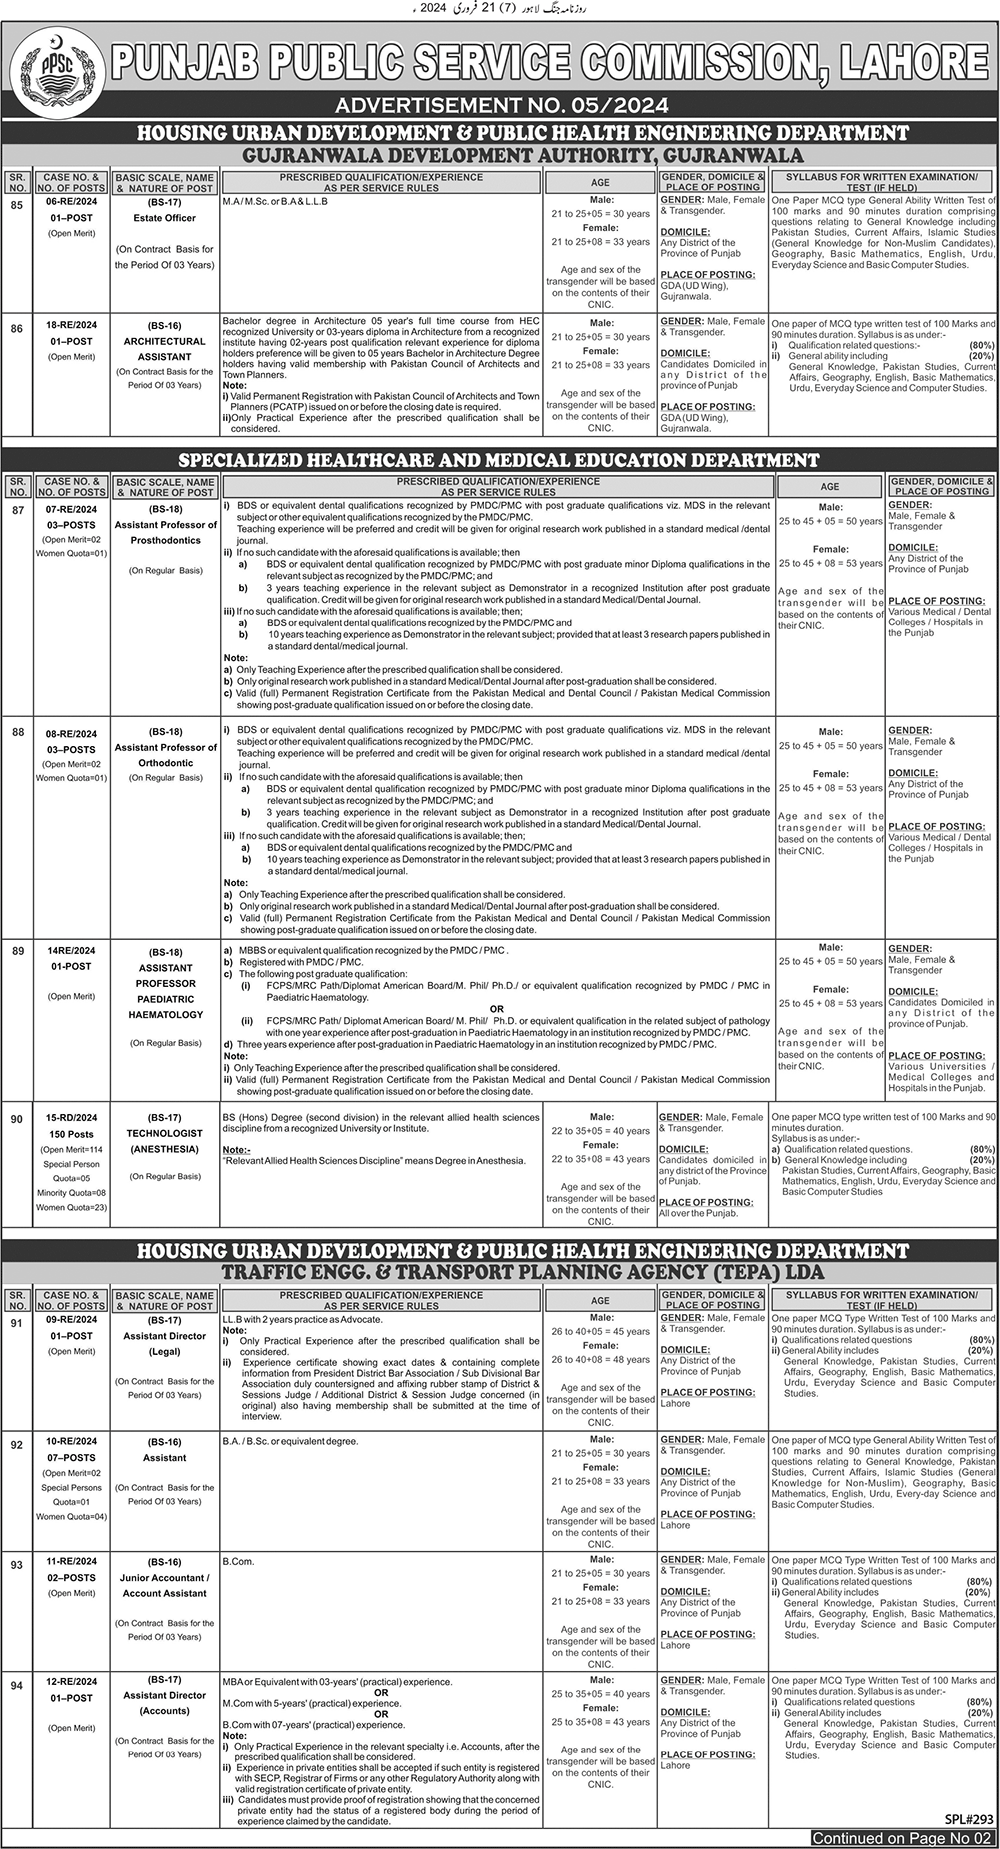 The Latest PPSC Vacancies Ad No. 05 of 2024